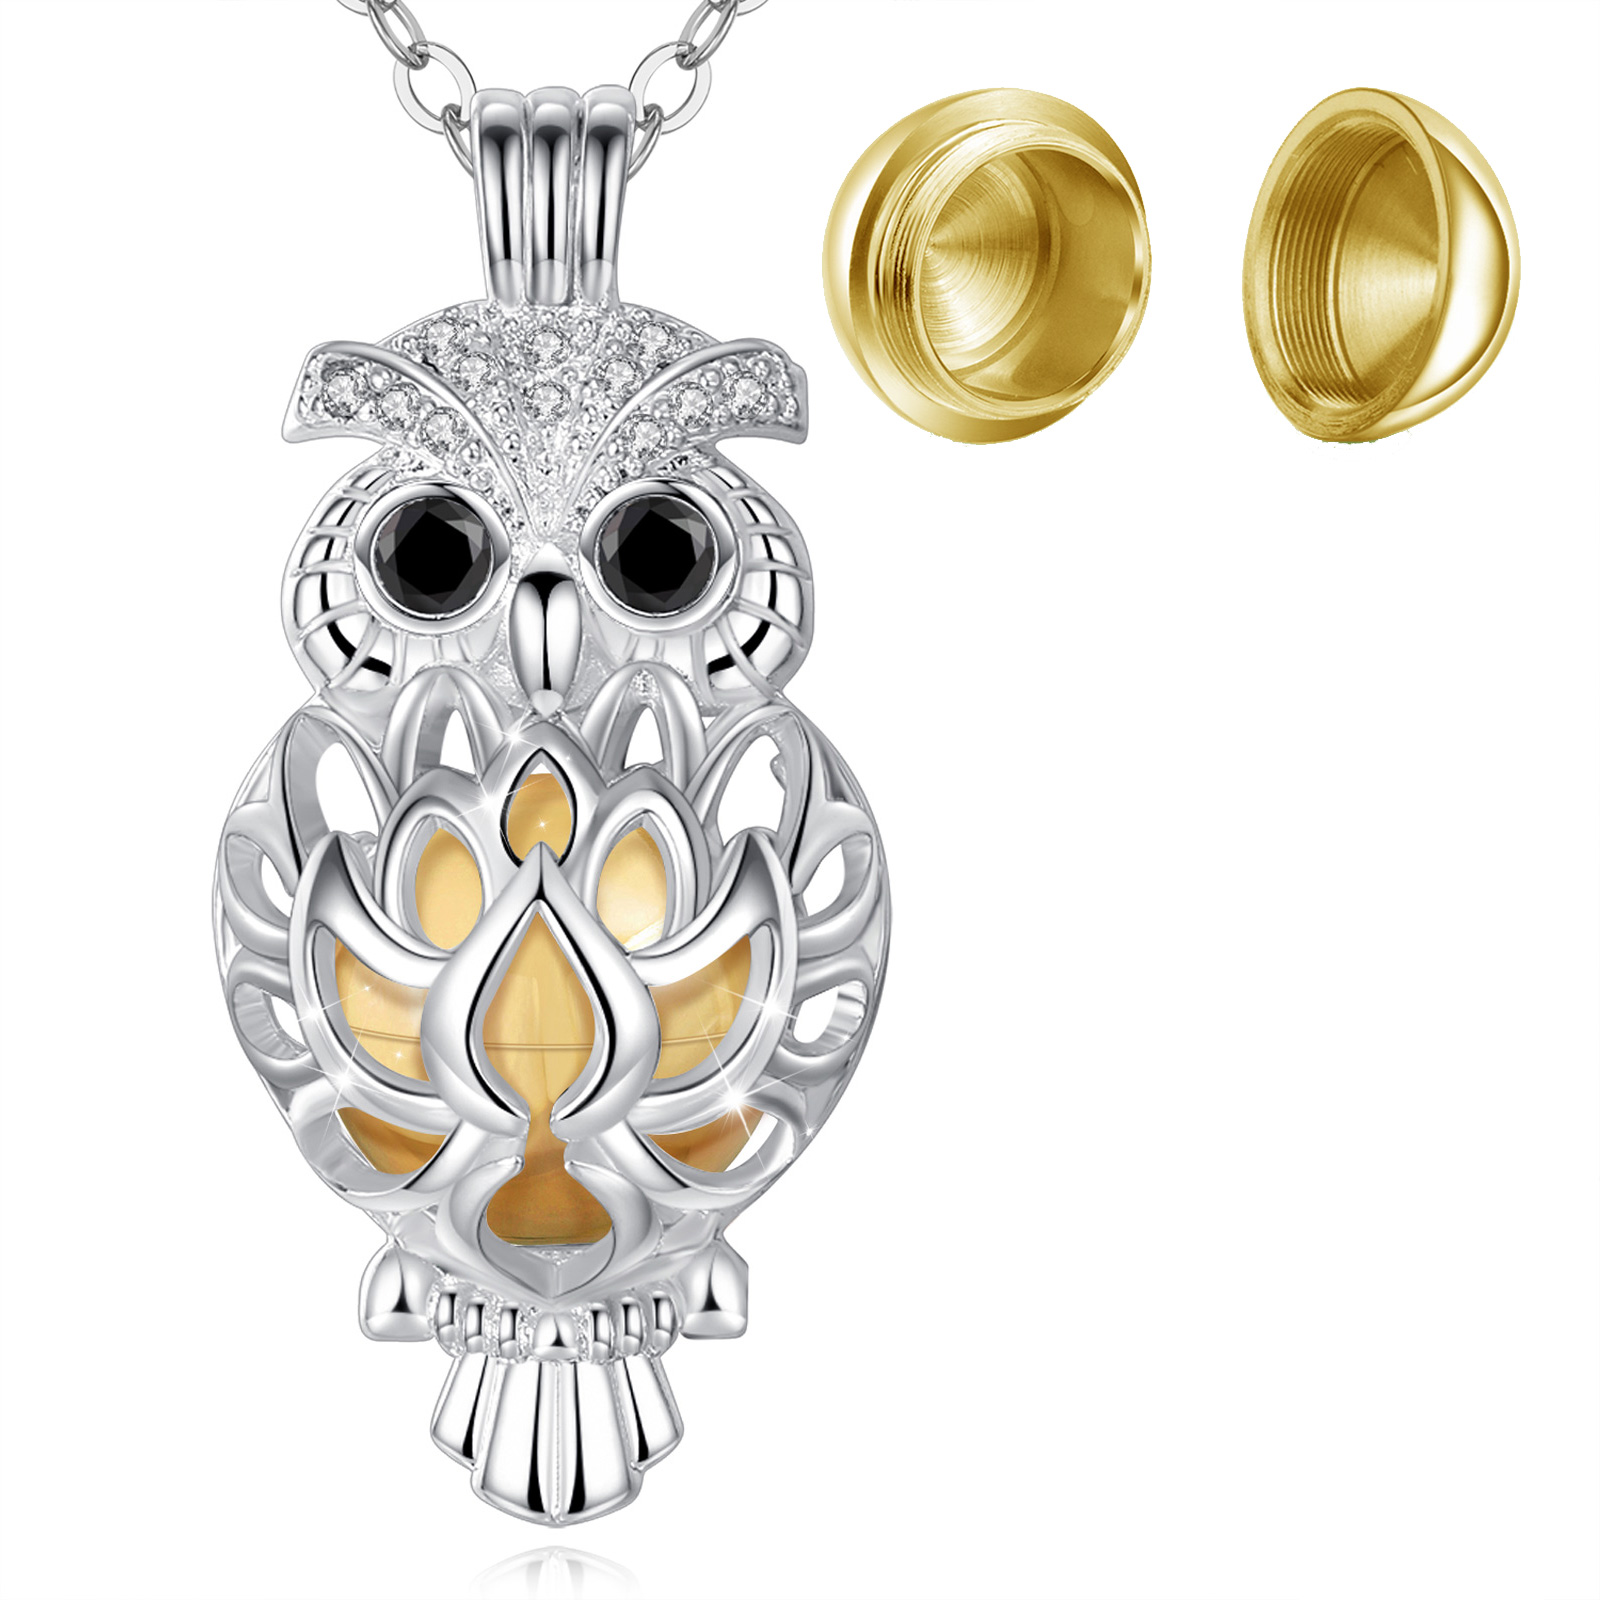 Merryshine Jewelry Wholesale S925 Sterling Silver Owl Cremation Urn Pendant Keepsake Necklace with Fill Kit Ashes